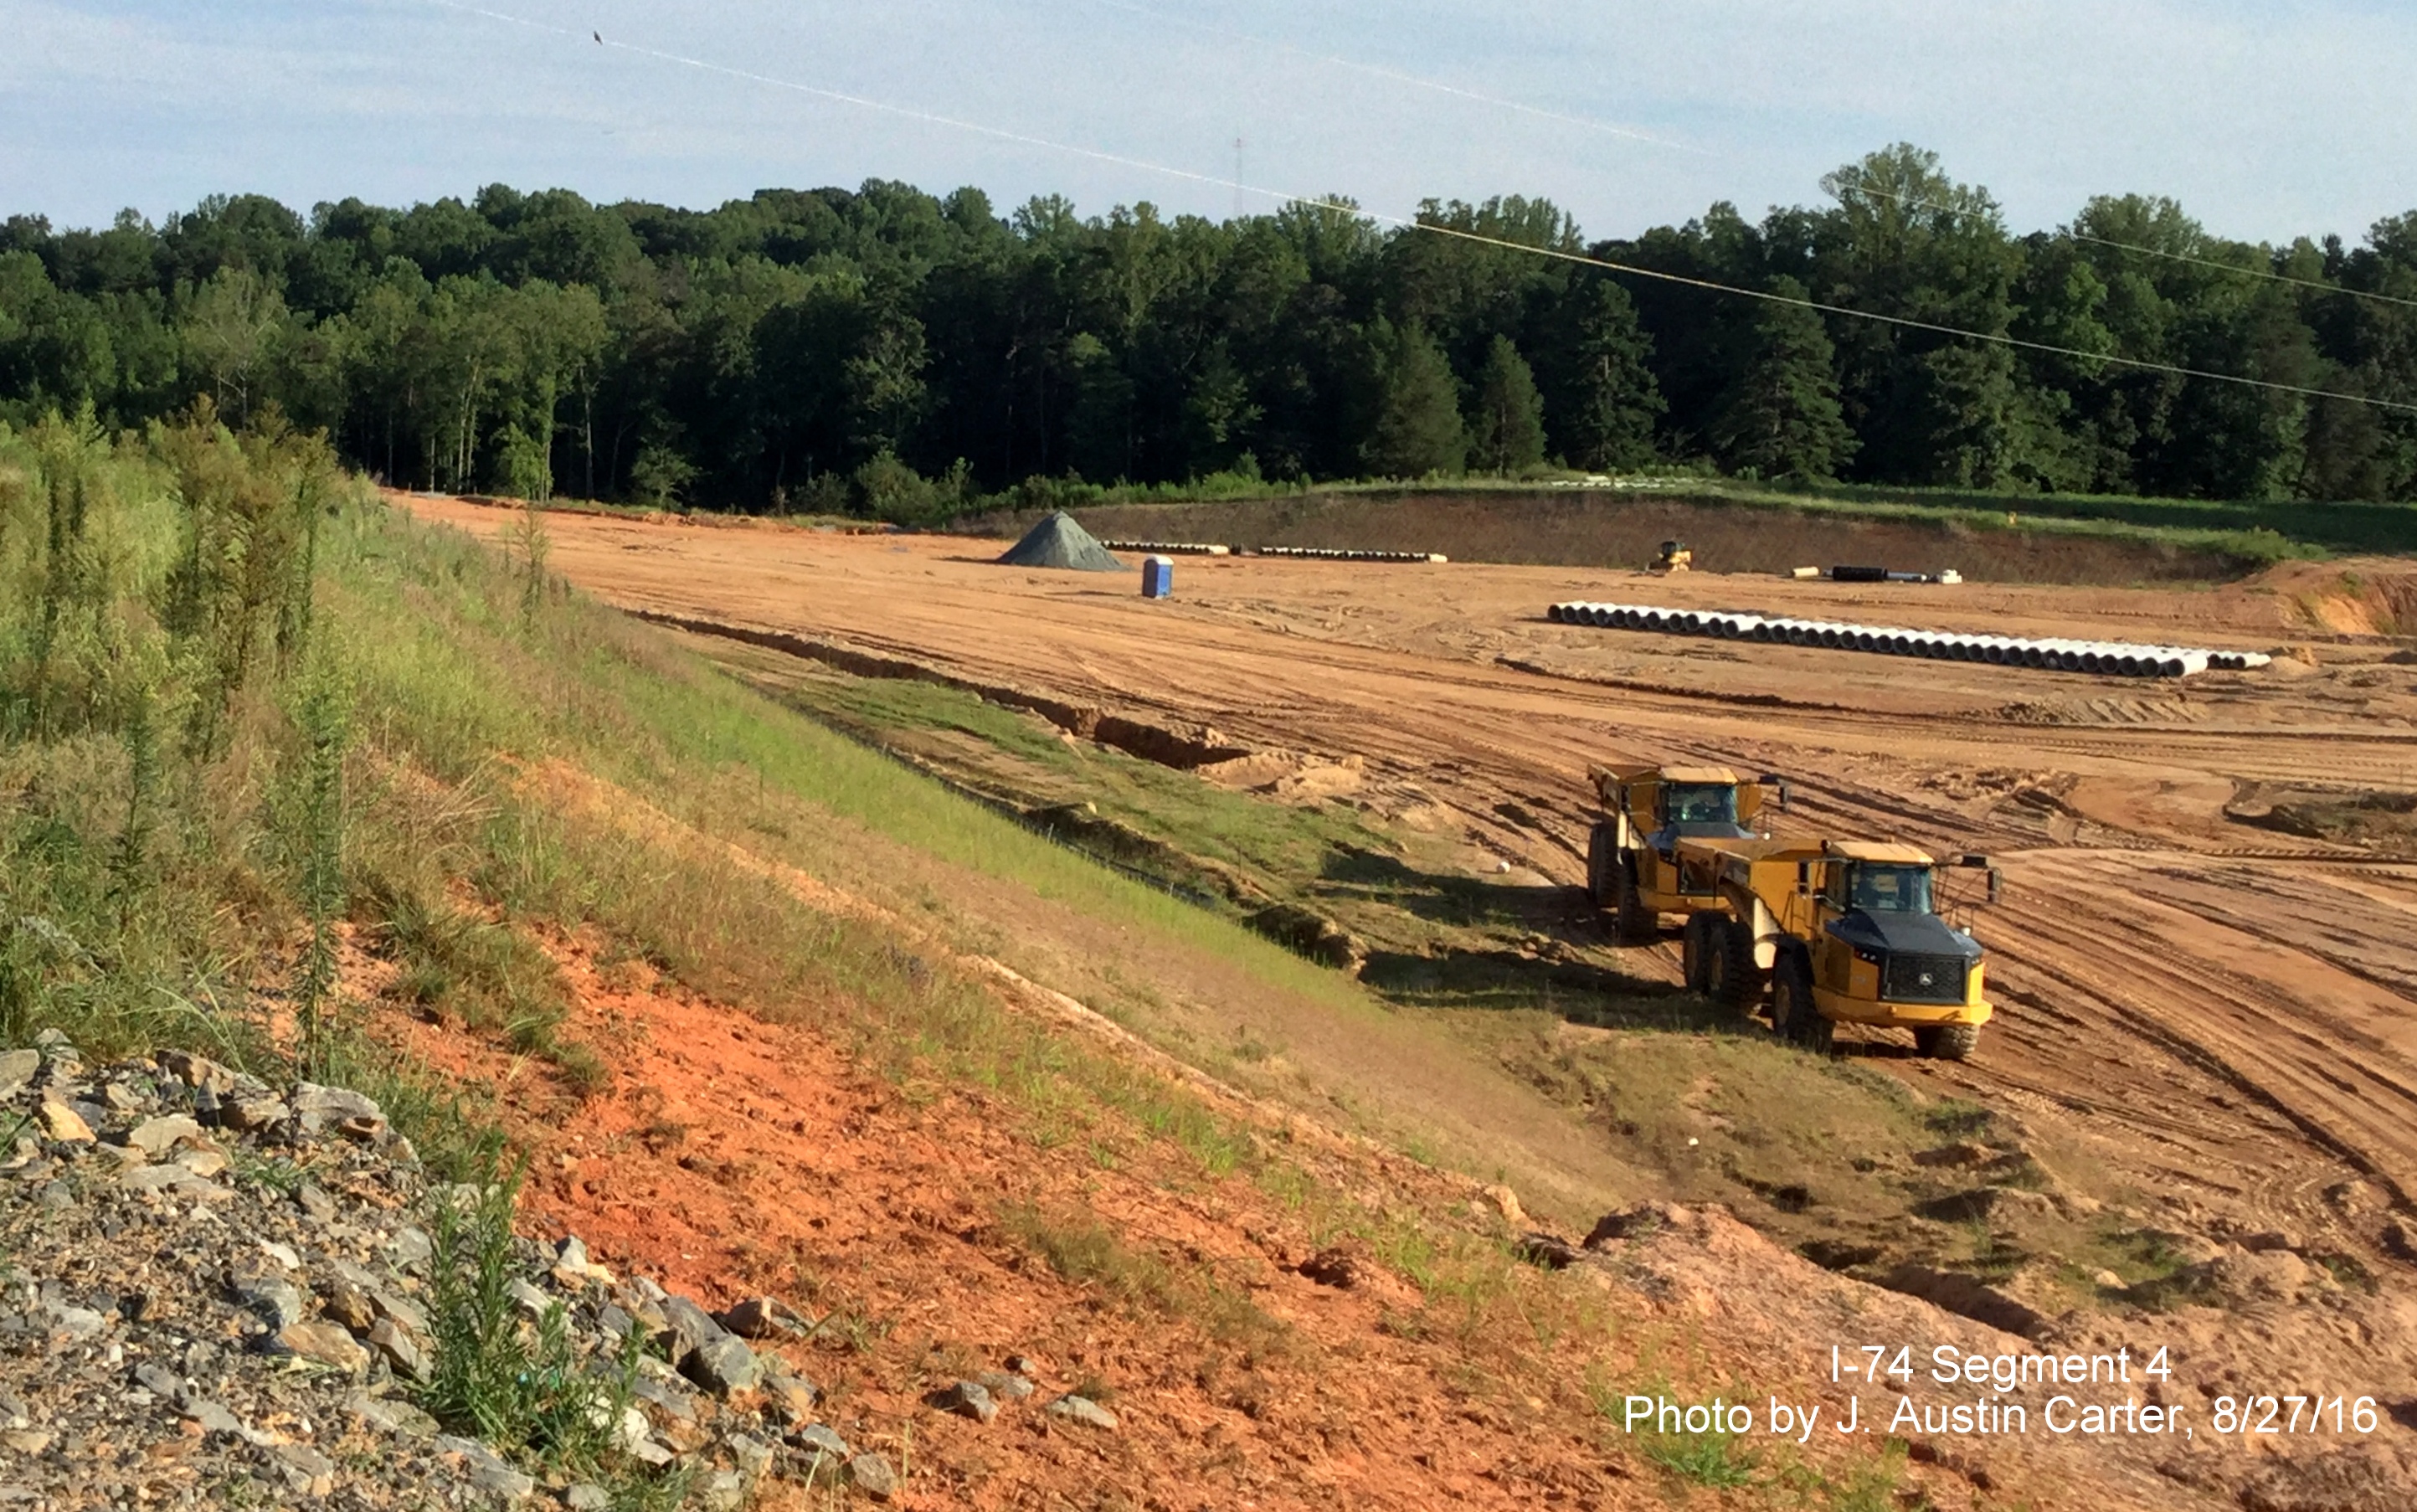 Image of clearing and grading being done along future path of Winston-Salem Northern Beltway/I-74, by J. Austin Carter